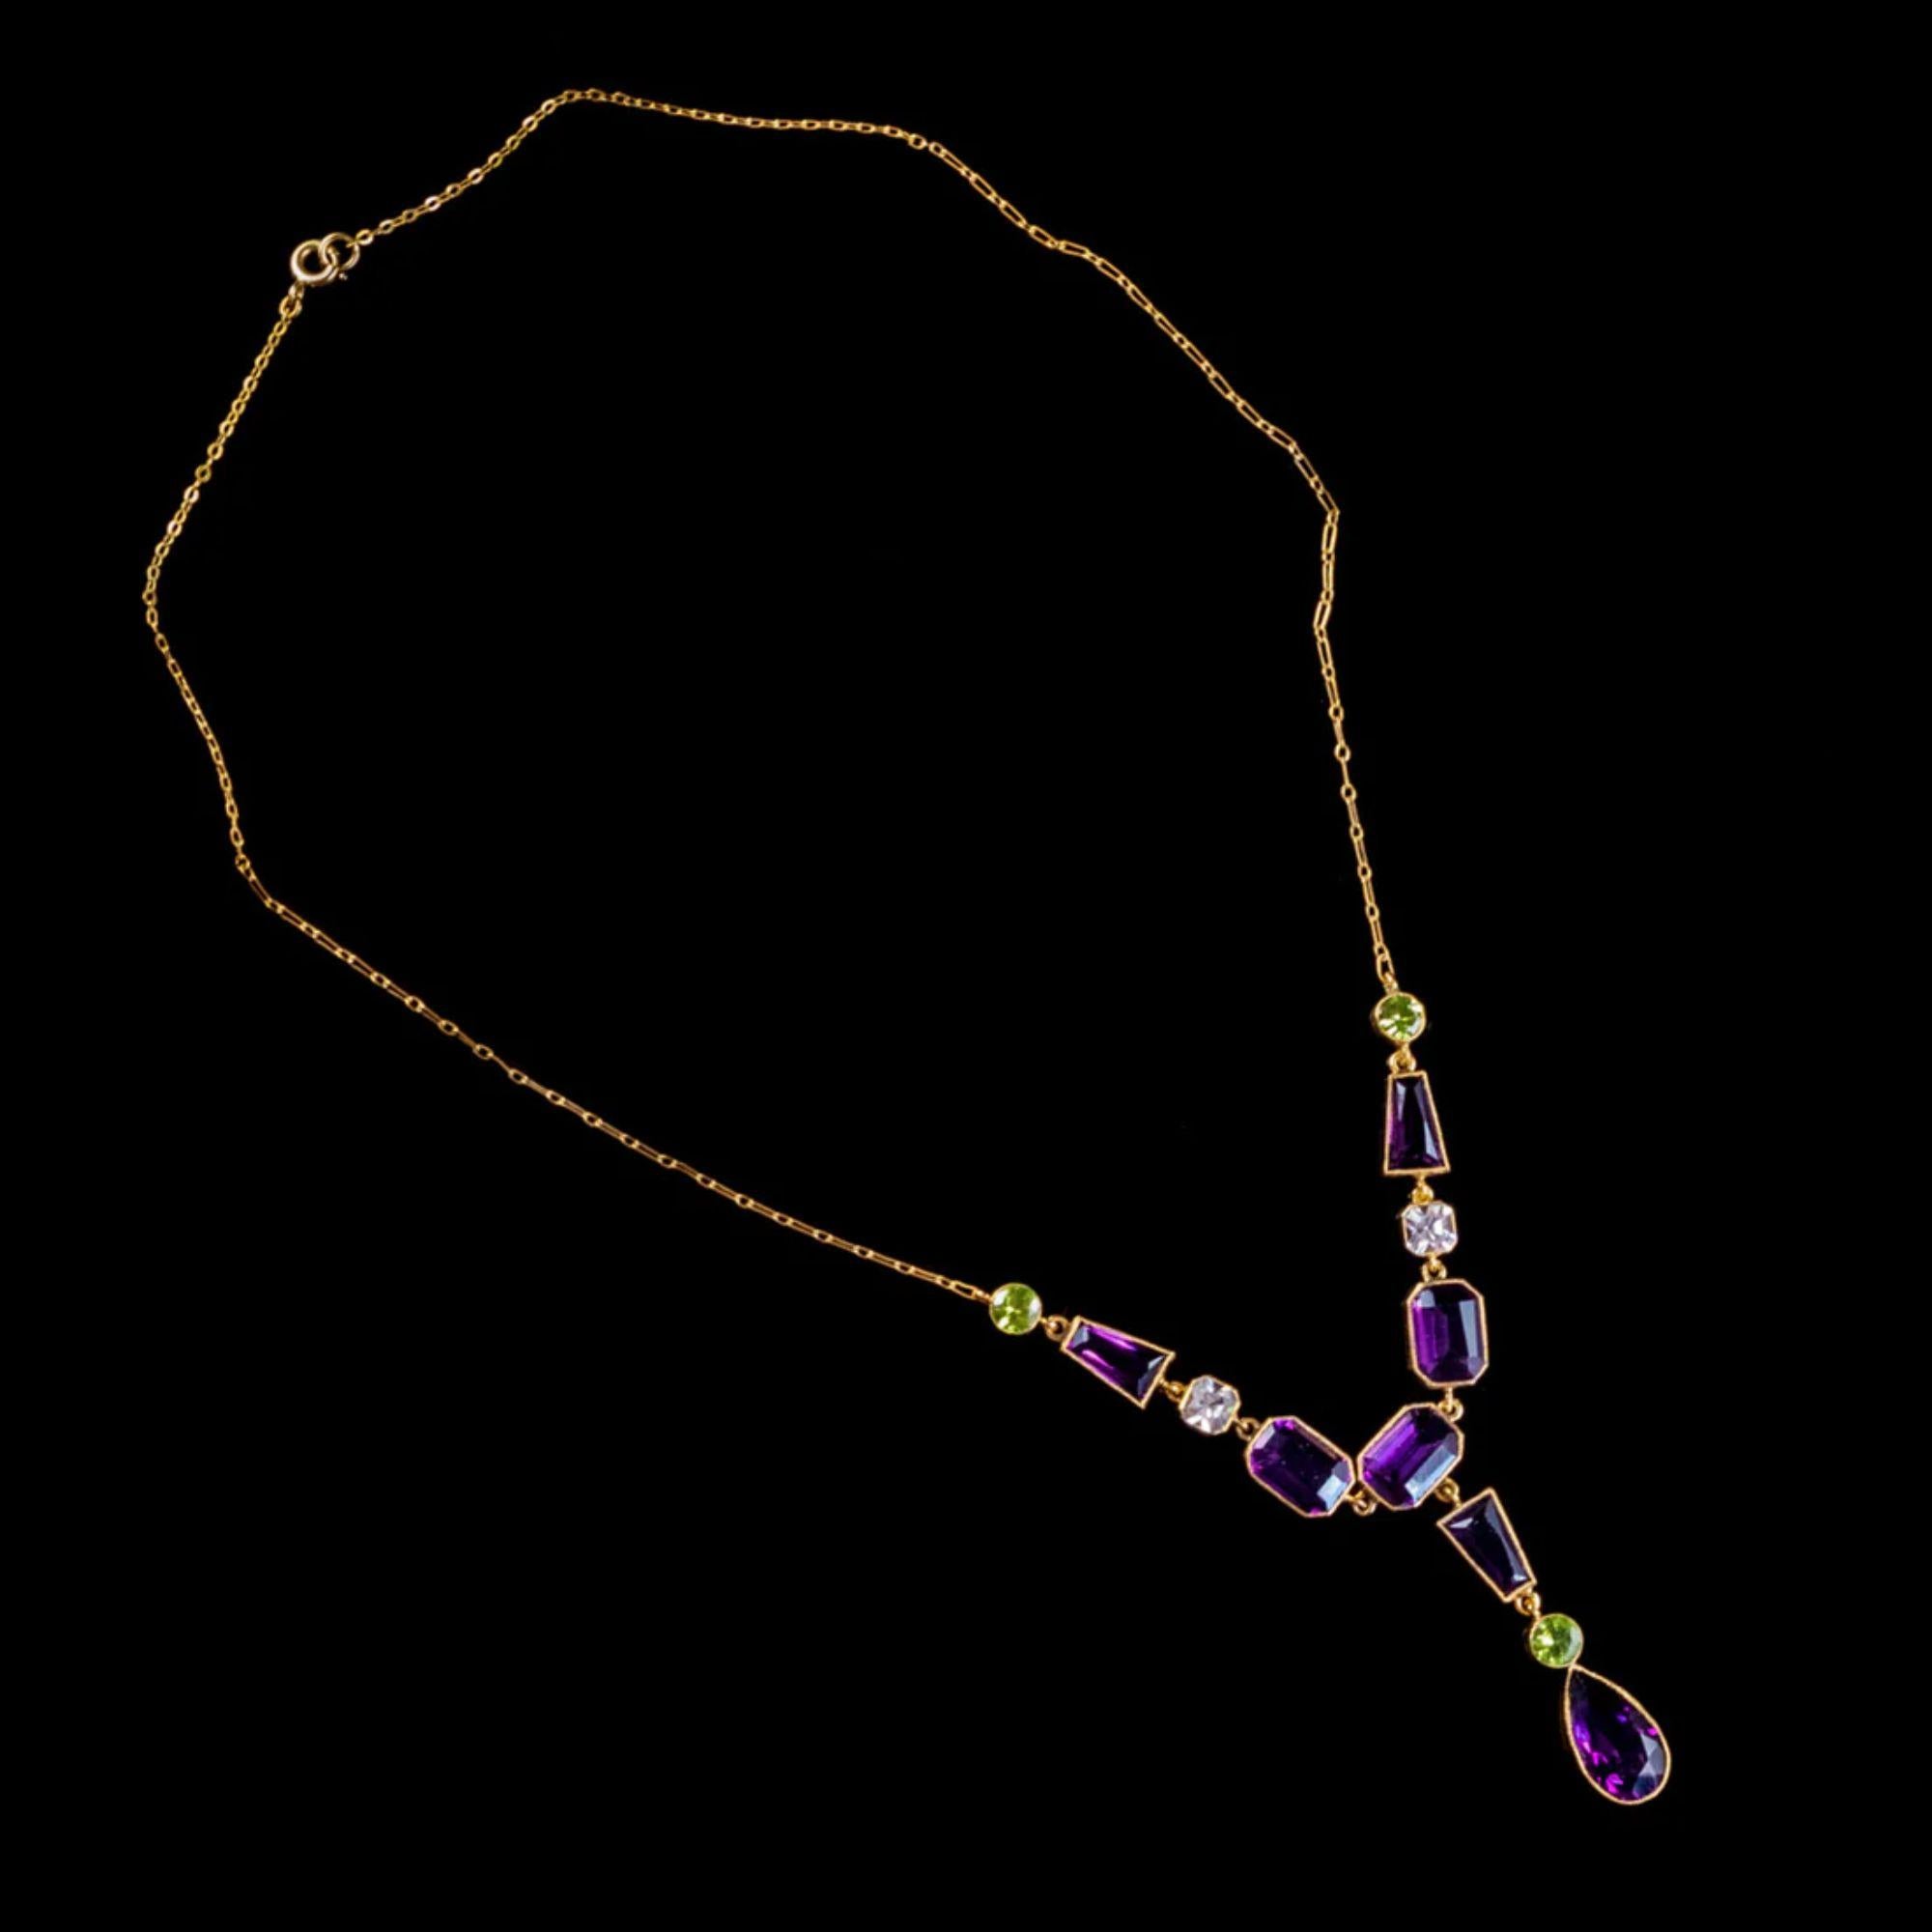 This magnificent Art Deco Suffragette lavaliere necklace has been commissioned in Silver and gilded with 18ct Yellow Gold. The lavaliere is set with an array of violet, green and white Pastes stones cut in various shapes and sizes which simulate